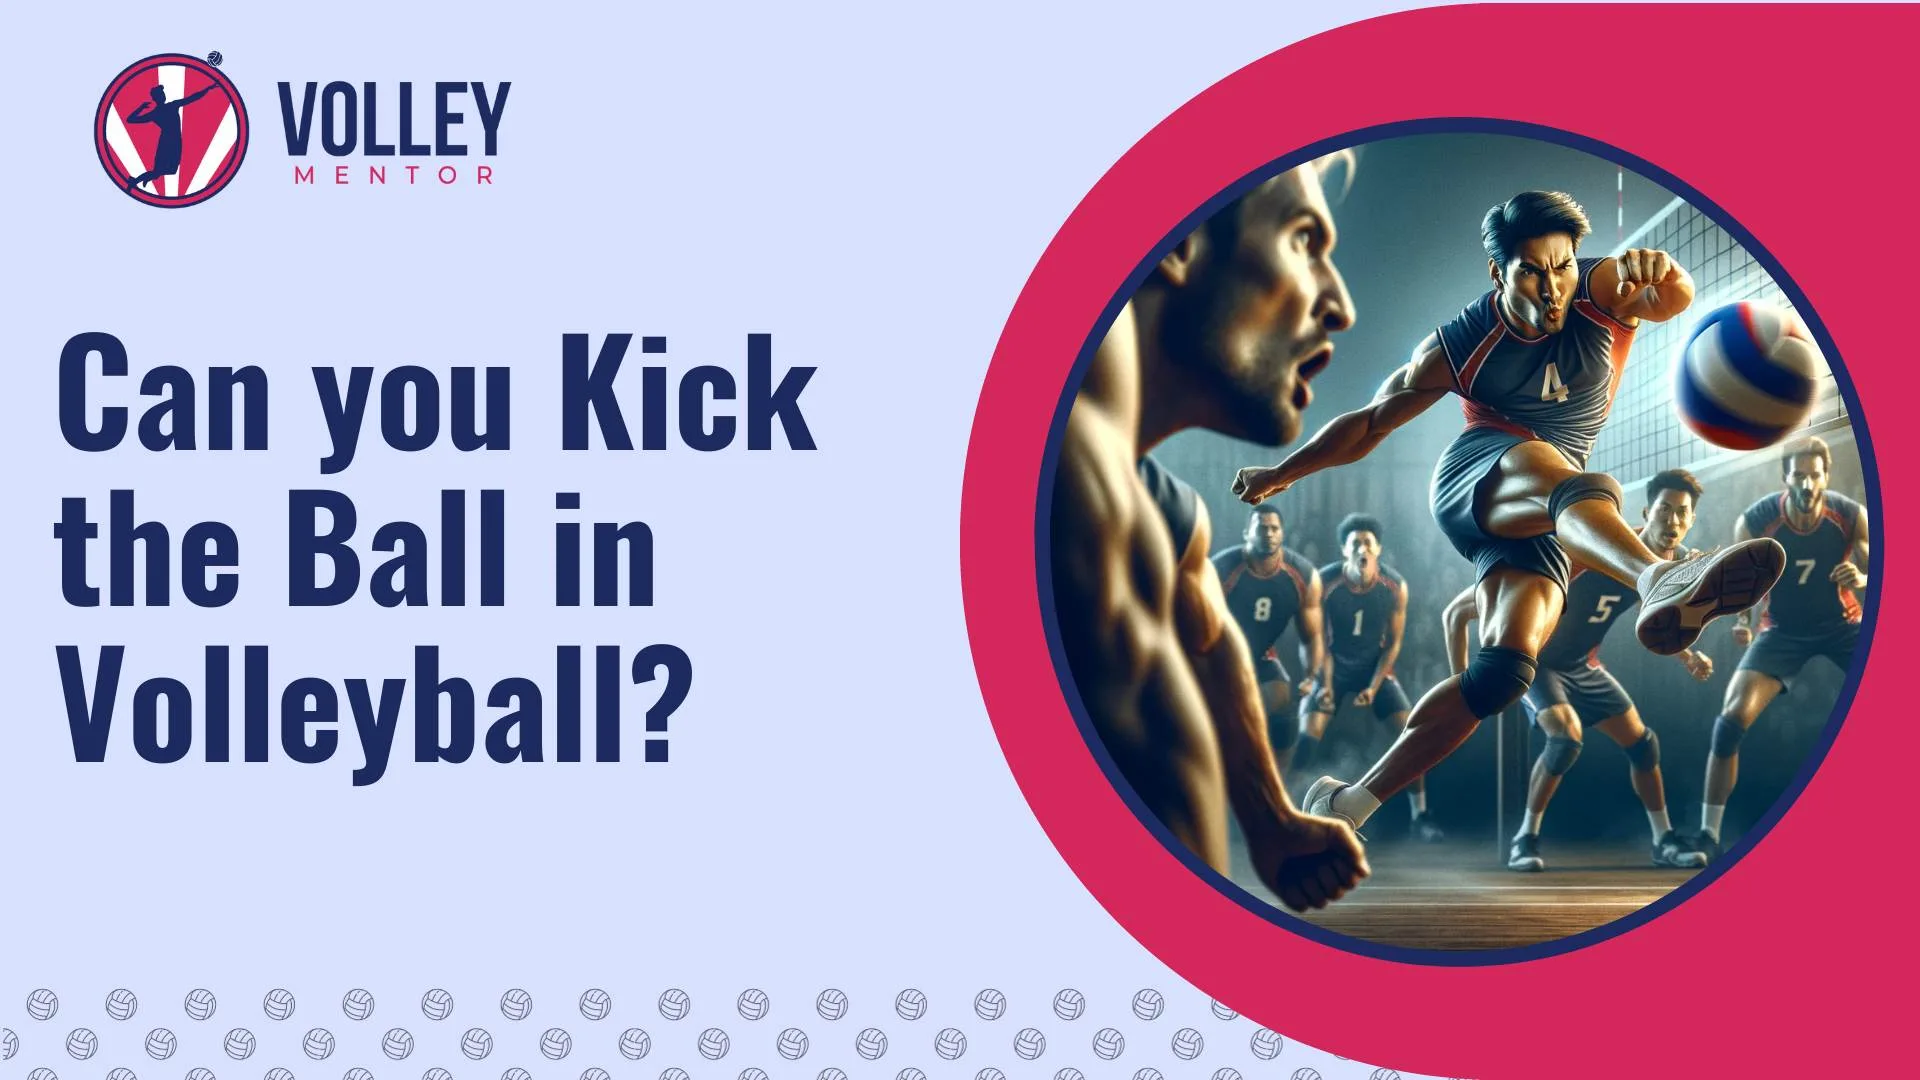 Can you kick the ball in Volleyball